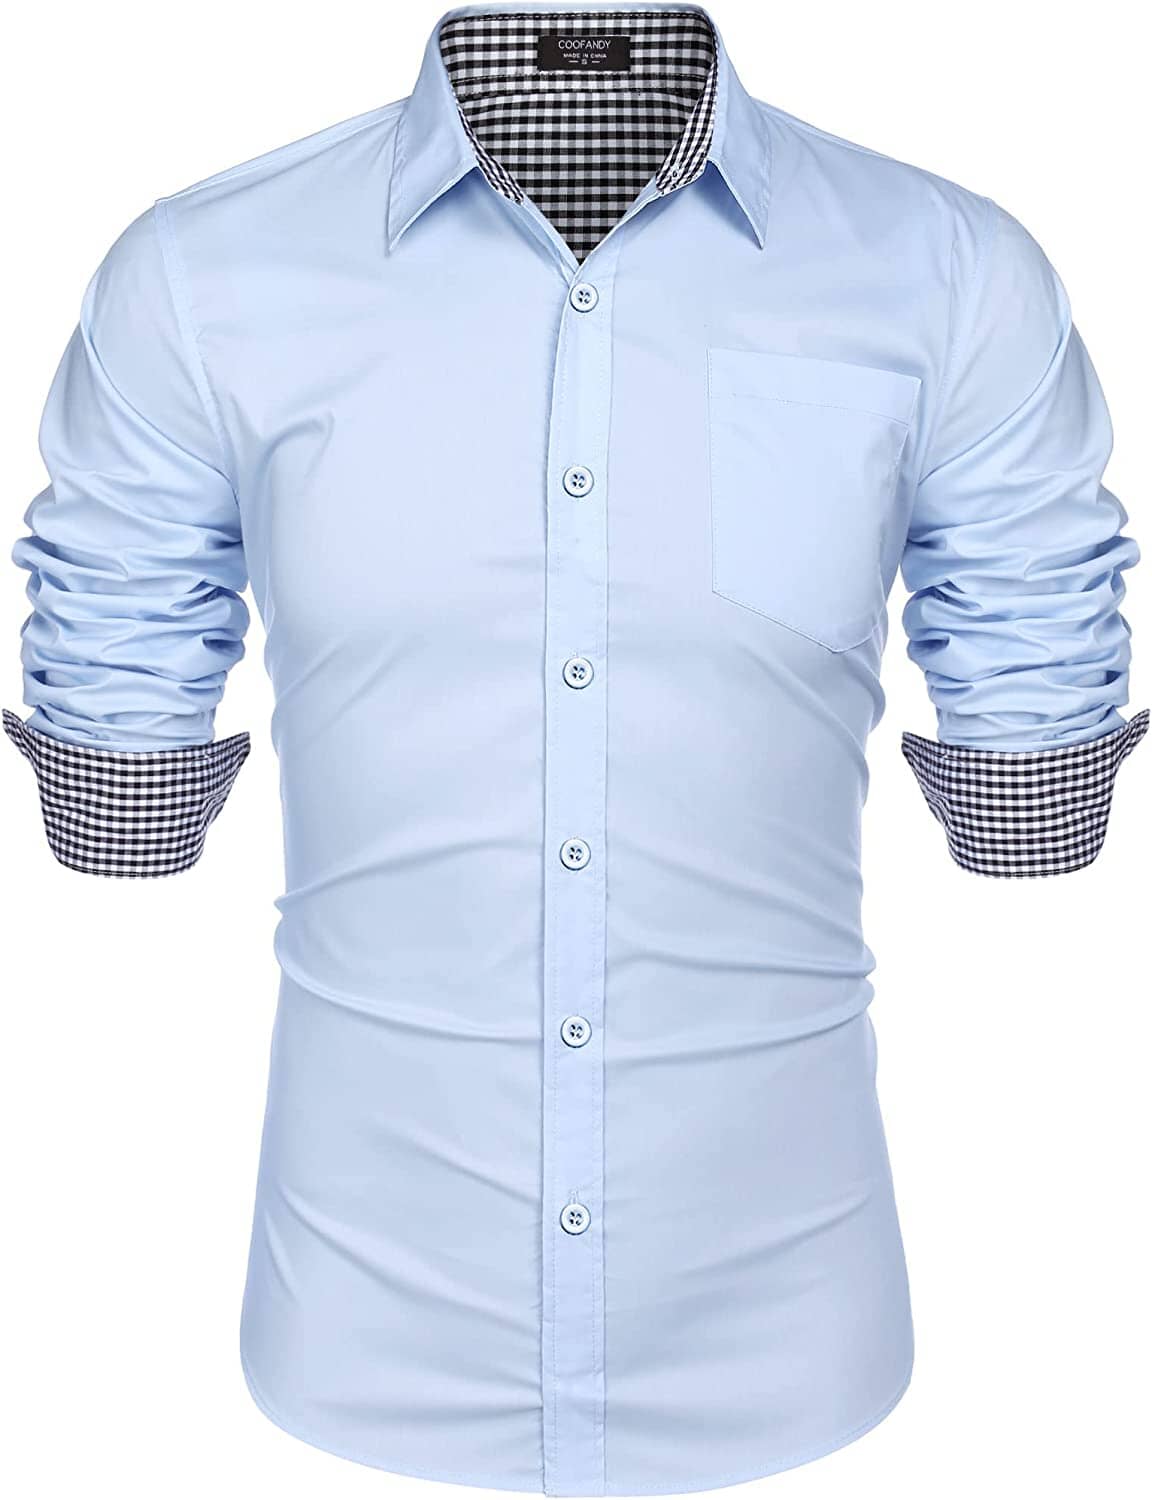 Fashion Business Cotton Dress Shirt (US Only) Shirts COOFANDY Store Blue S 